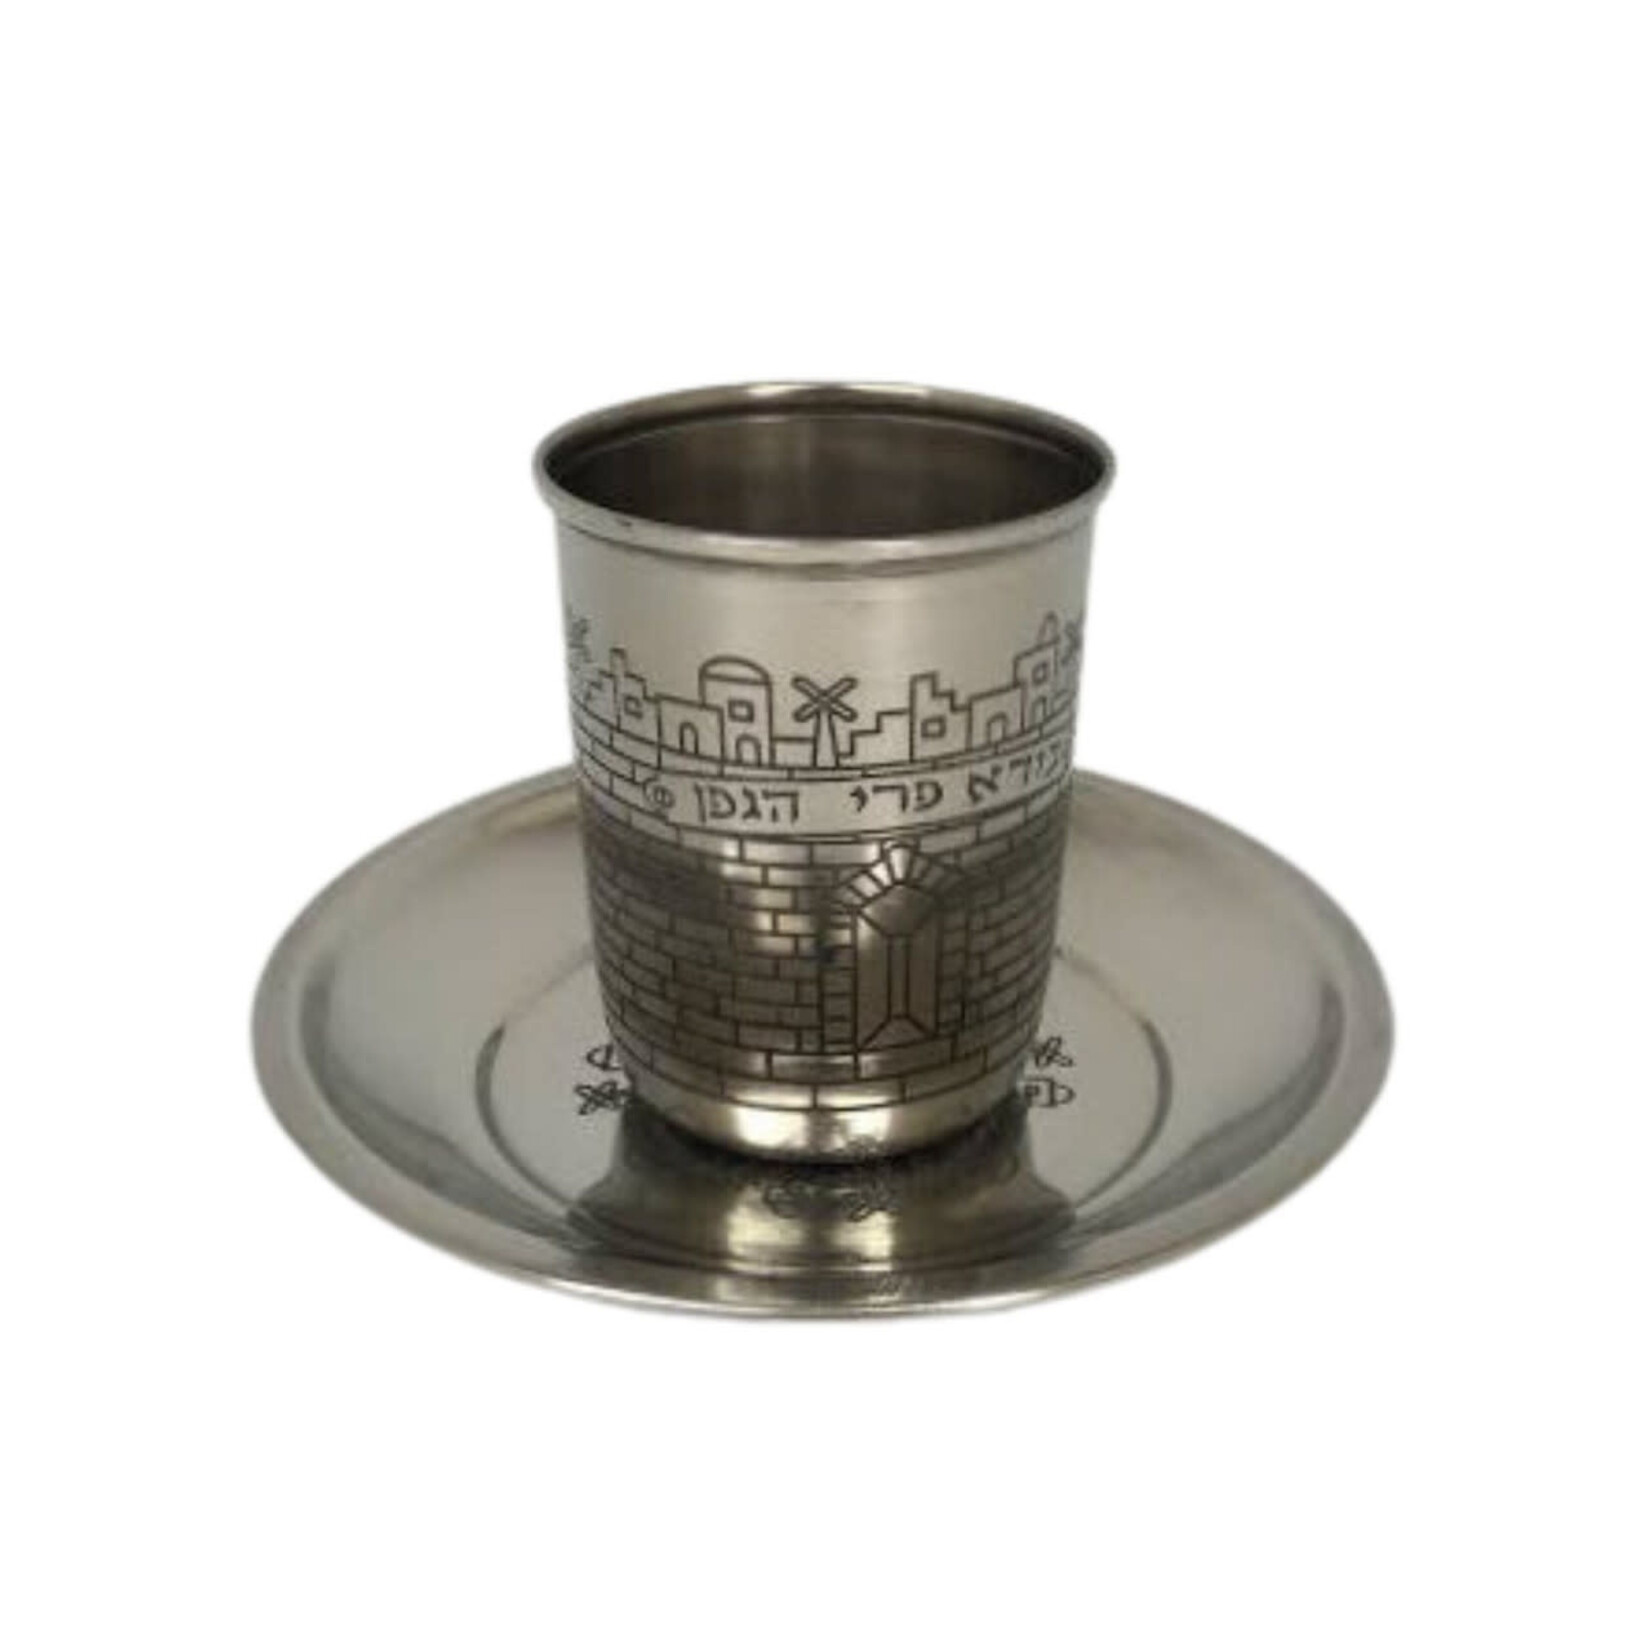 Kiddush Cup with Tray, Stainless Steel